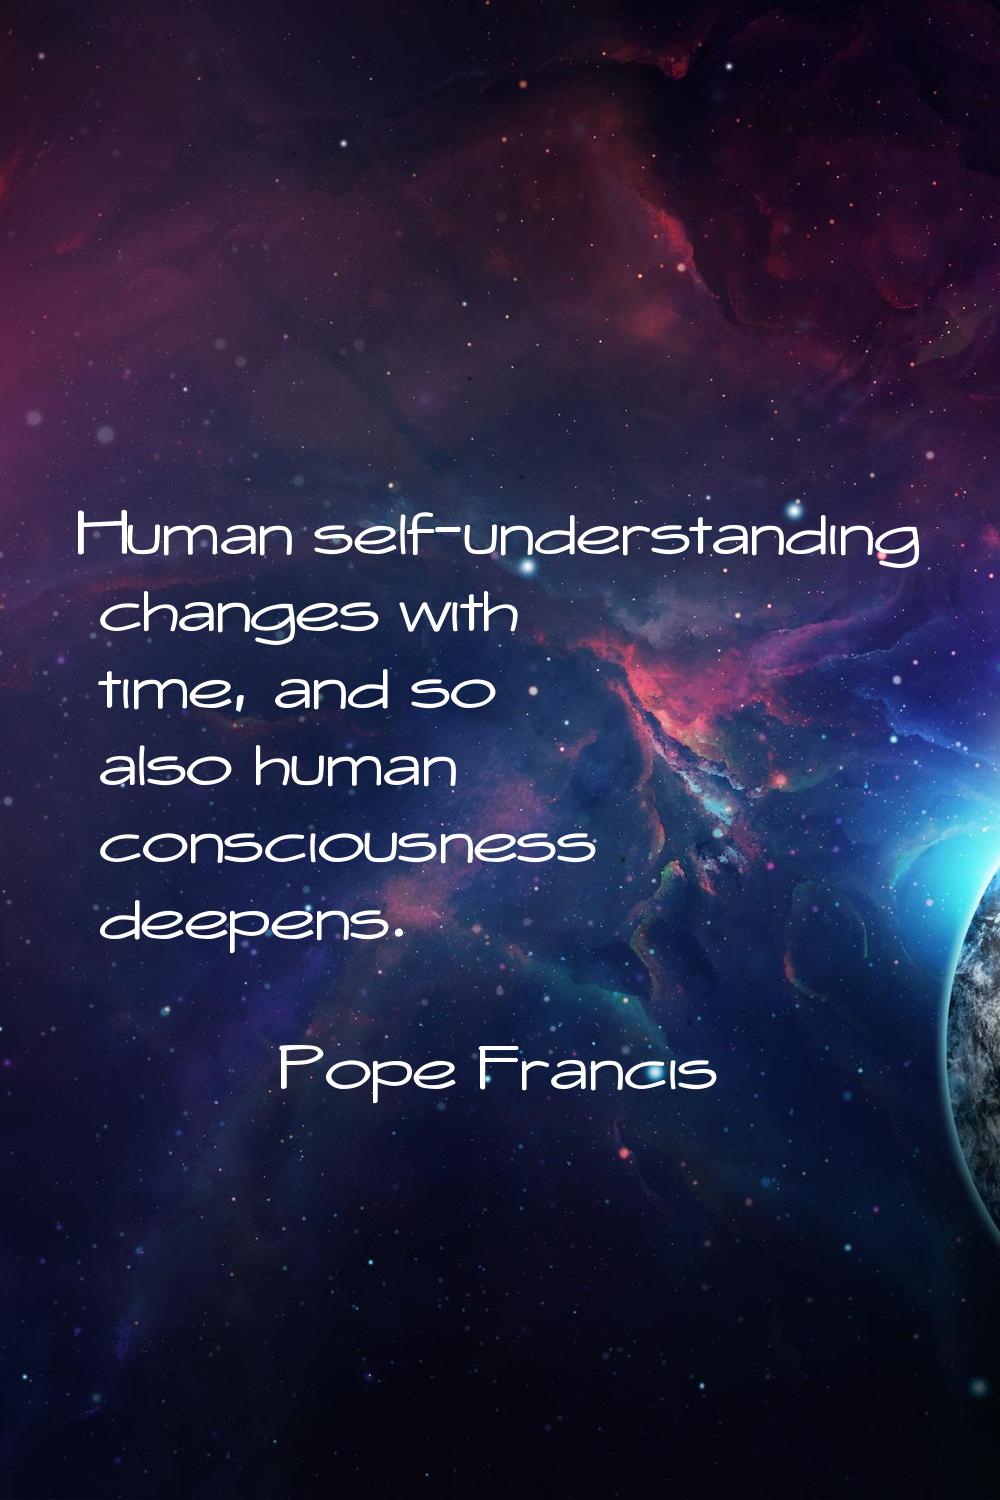 Human self-understanding changes with time, and so also human consciousness deepens.